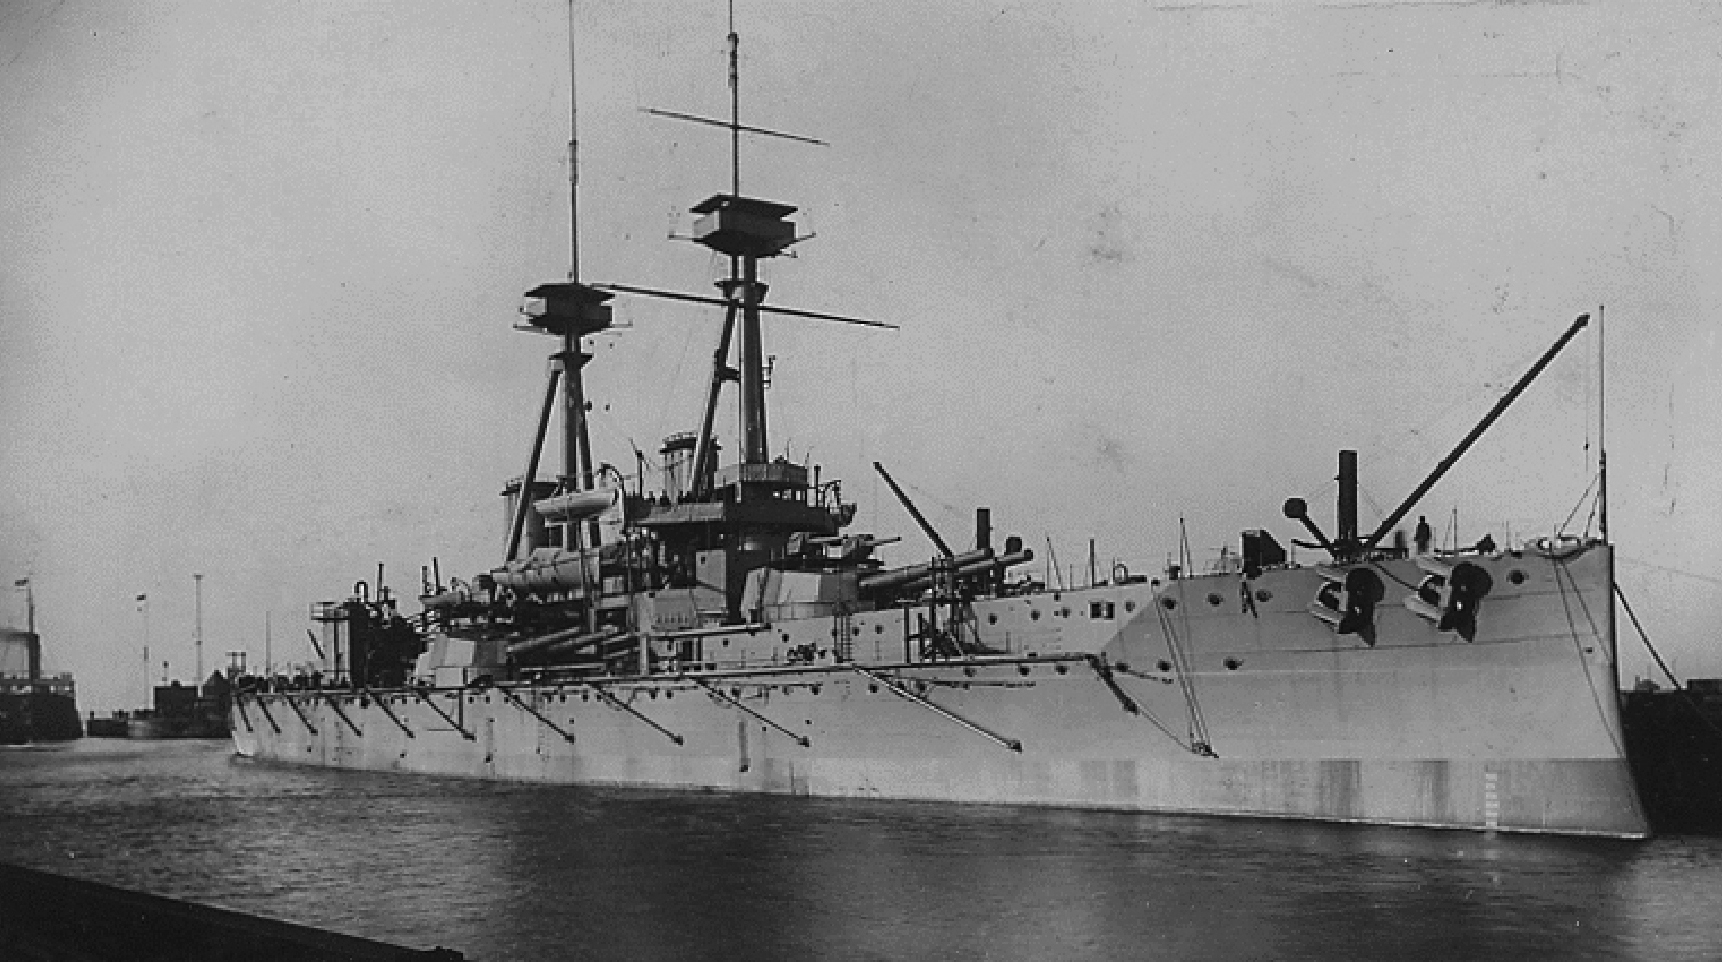 HMS Vanguard anchored in Scapa Flow, Orkney.